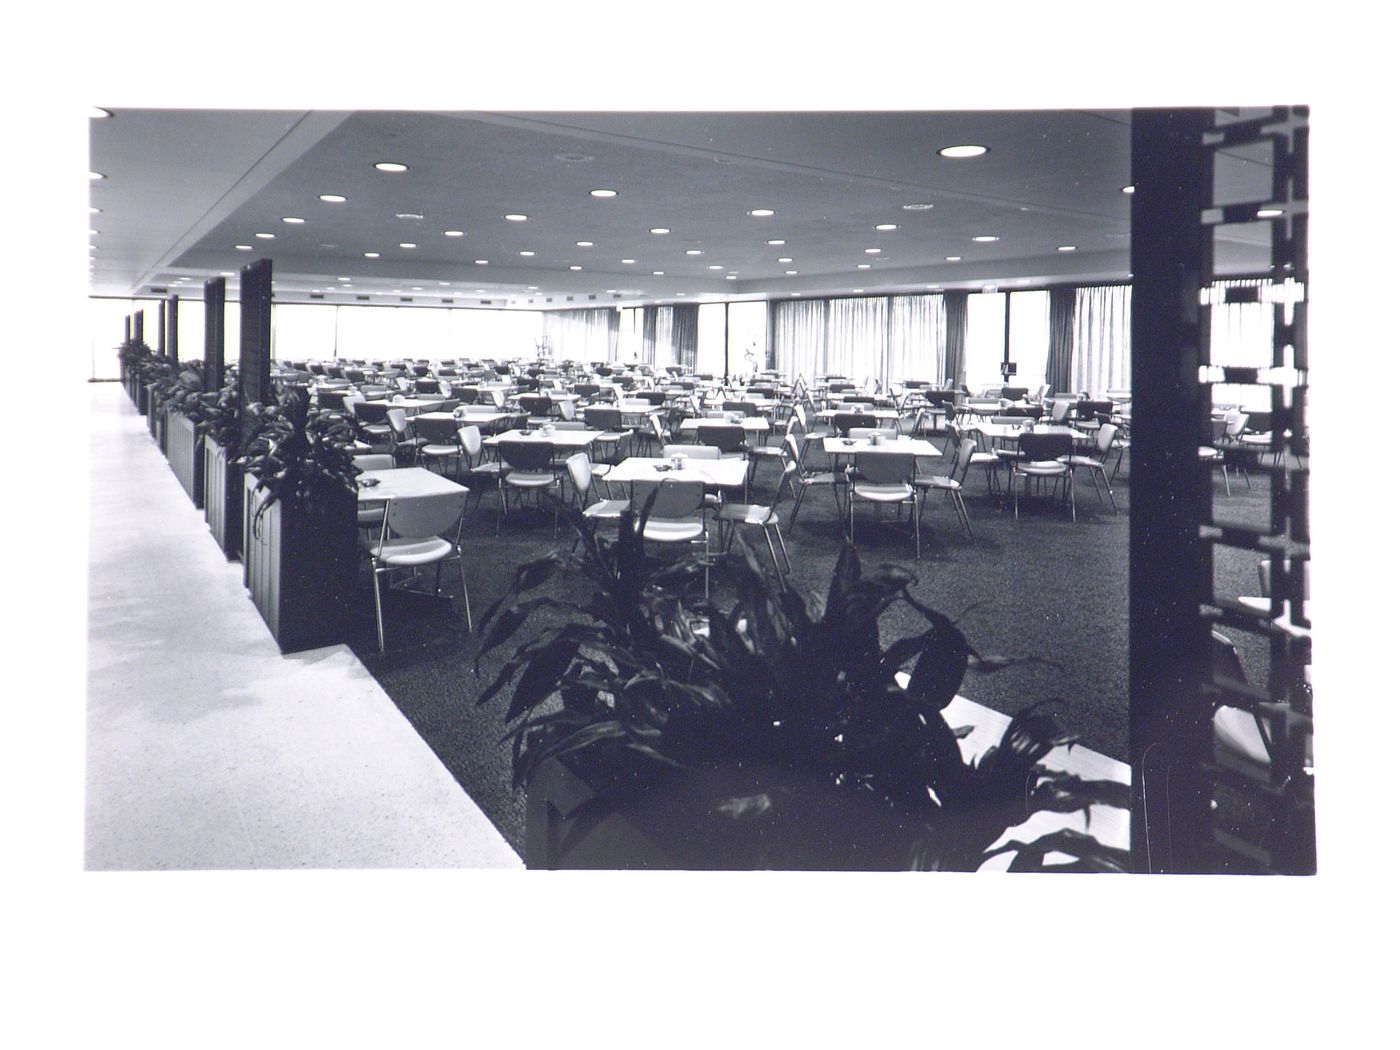 Interior view of the cafeteria area with tables and chairs, Gulf Life Tower building, Jacksonville, Florida, United States